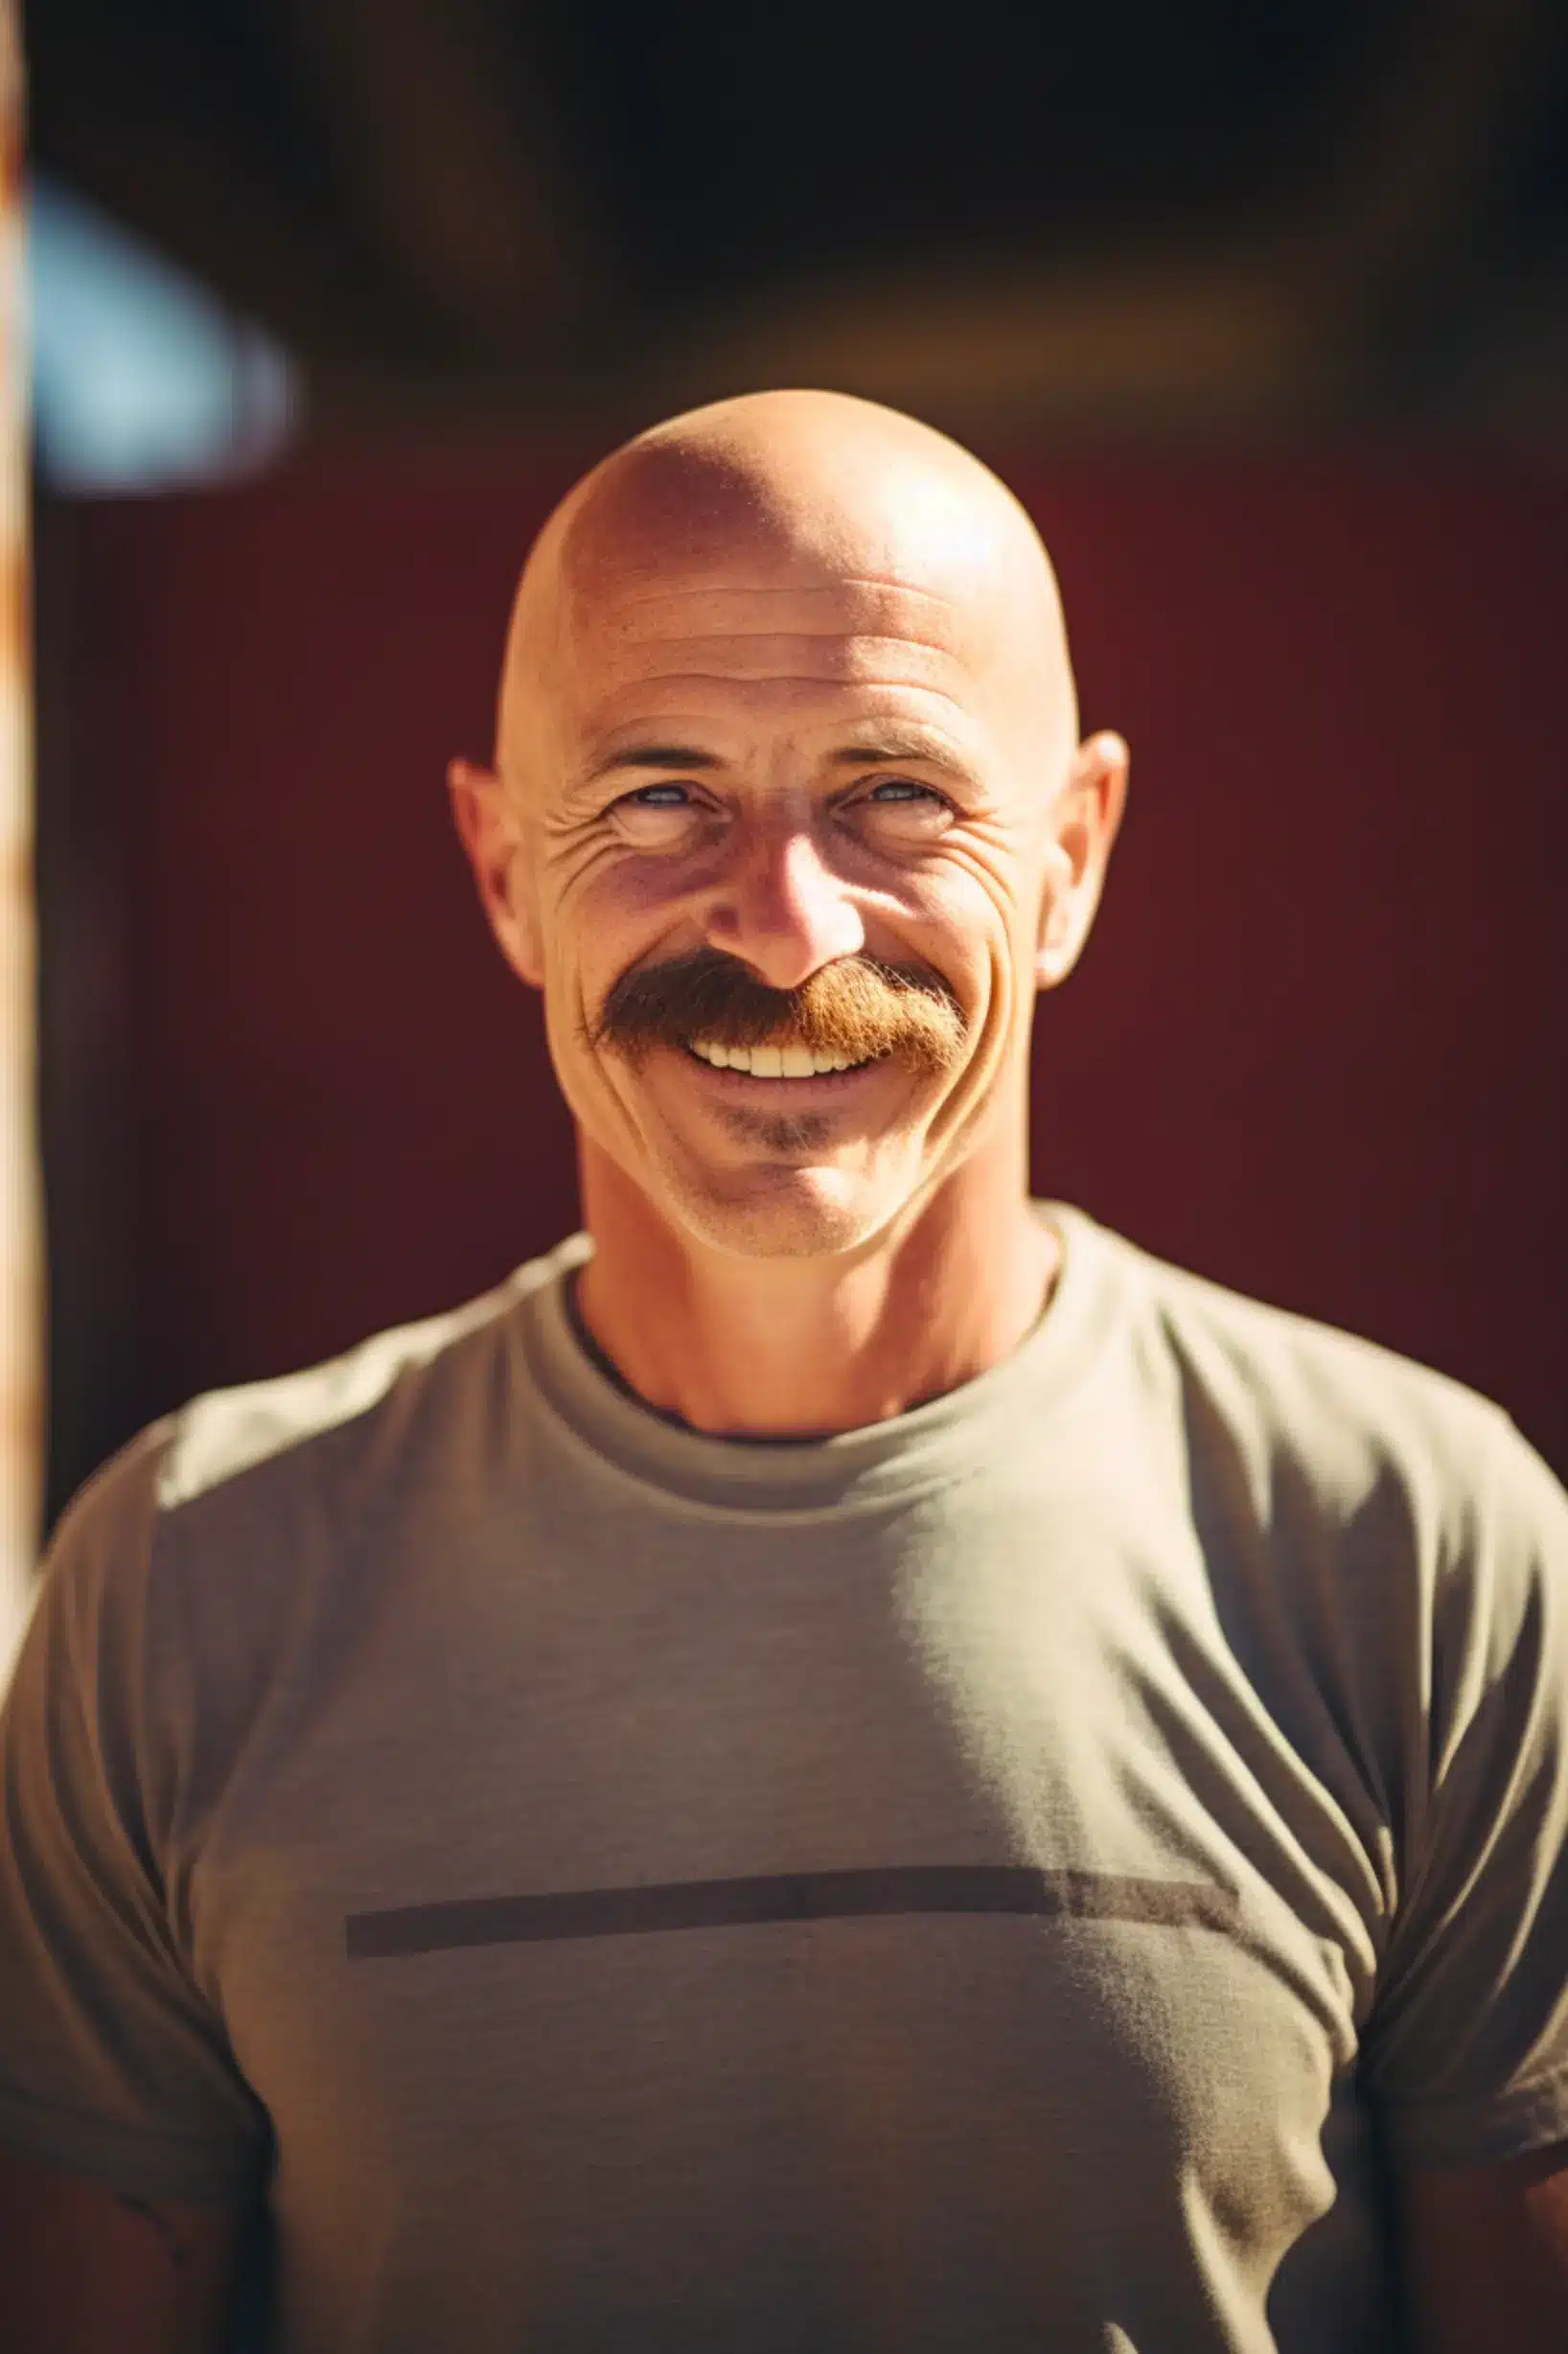 bald man with a chevron style mustache